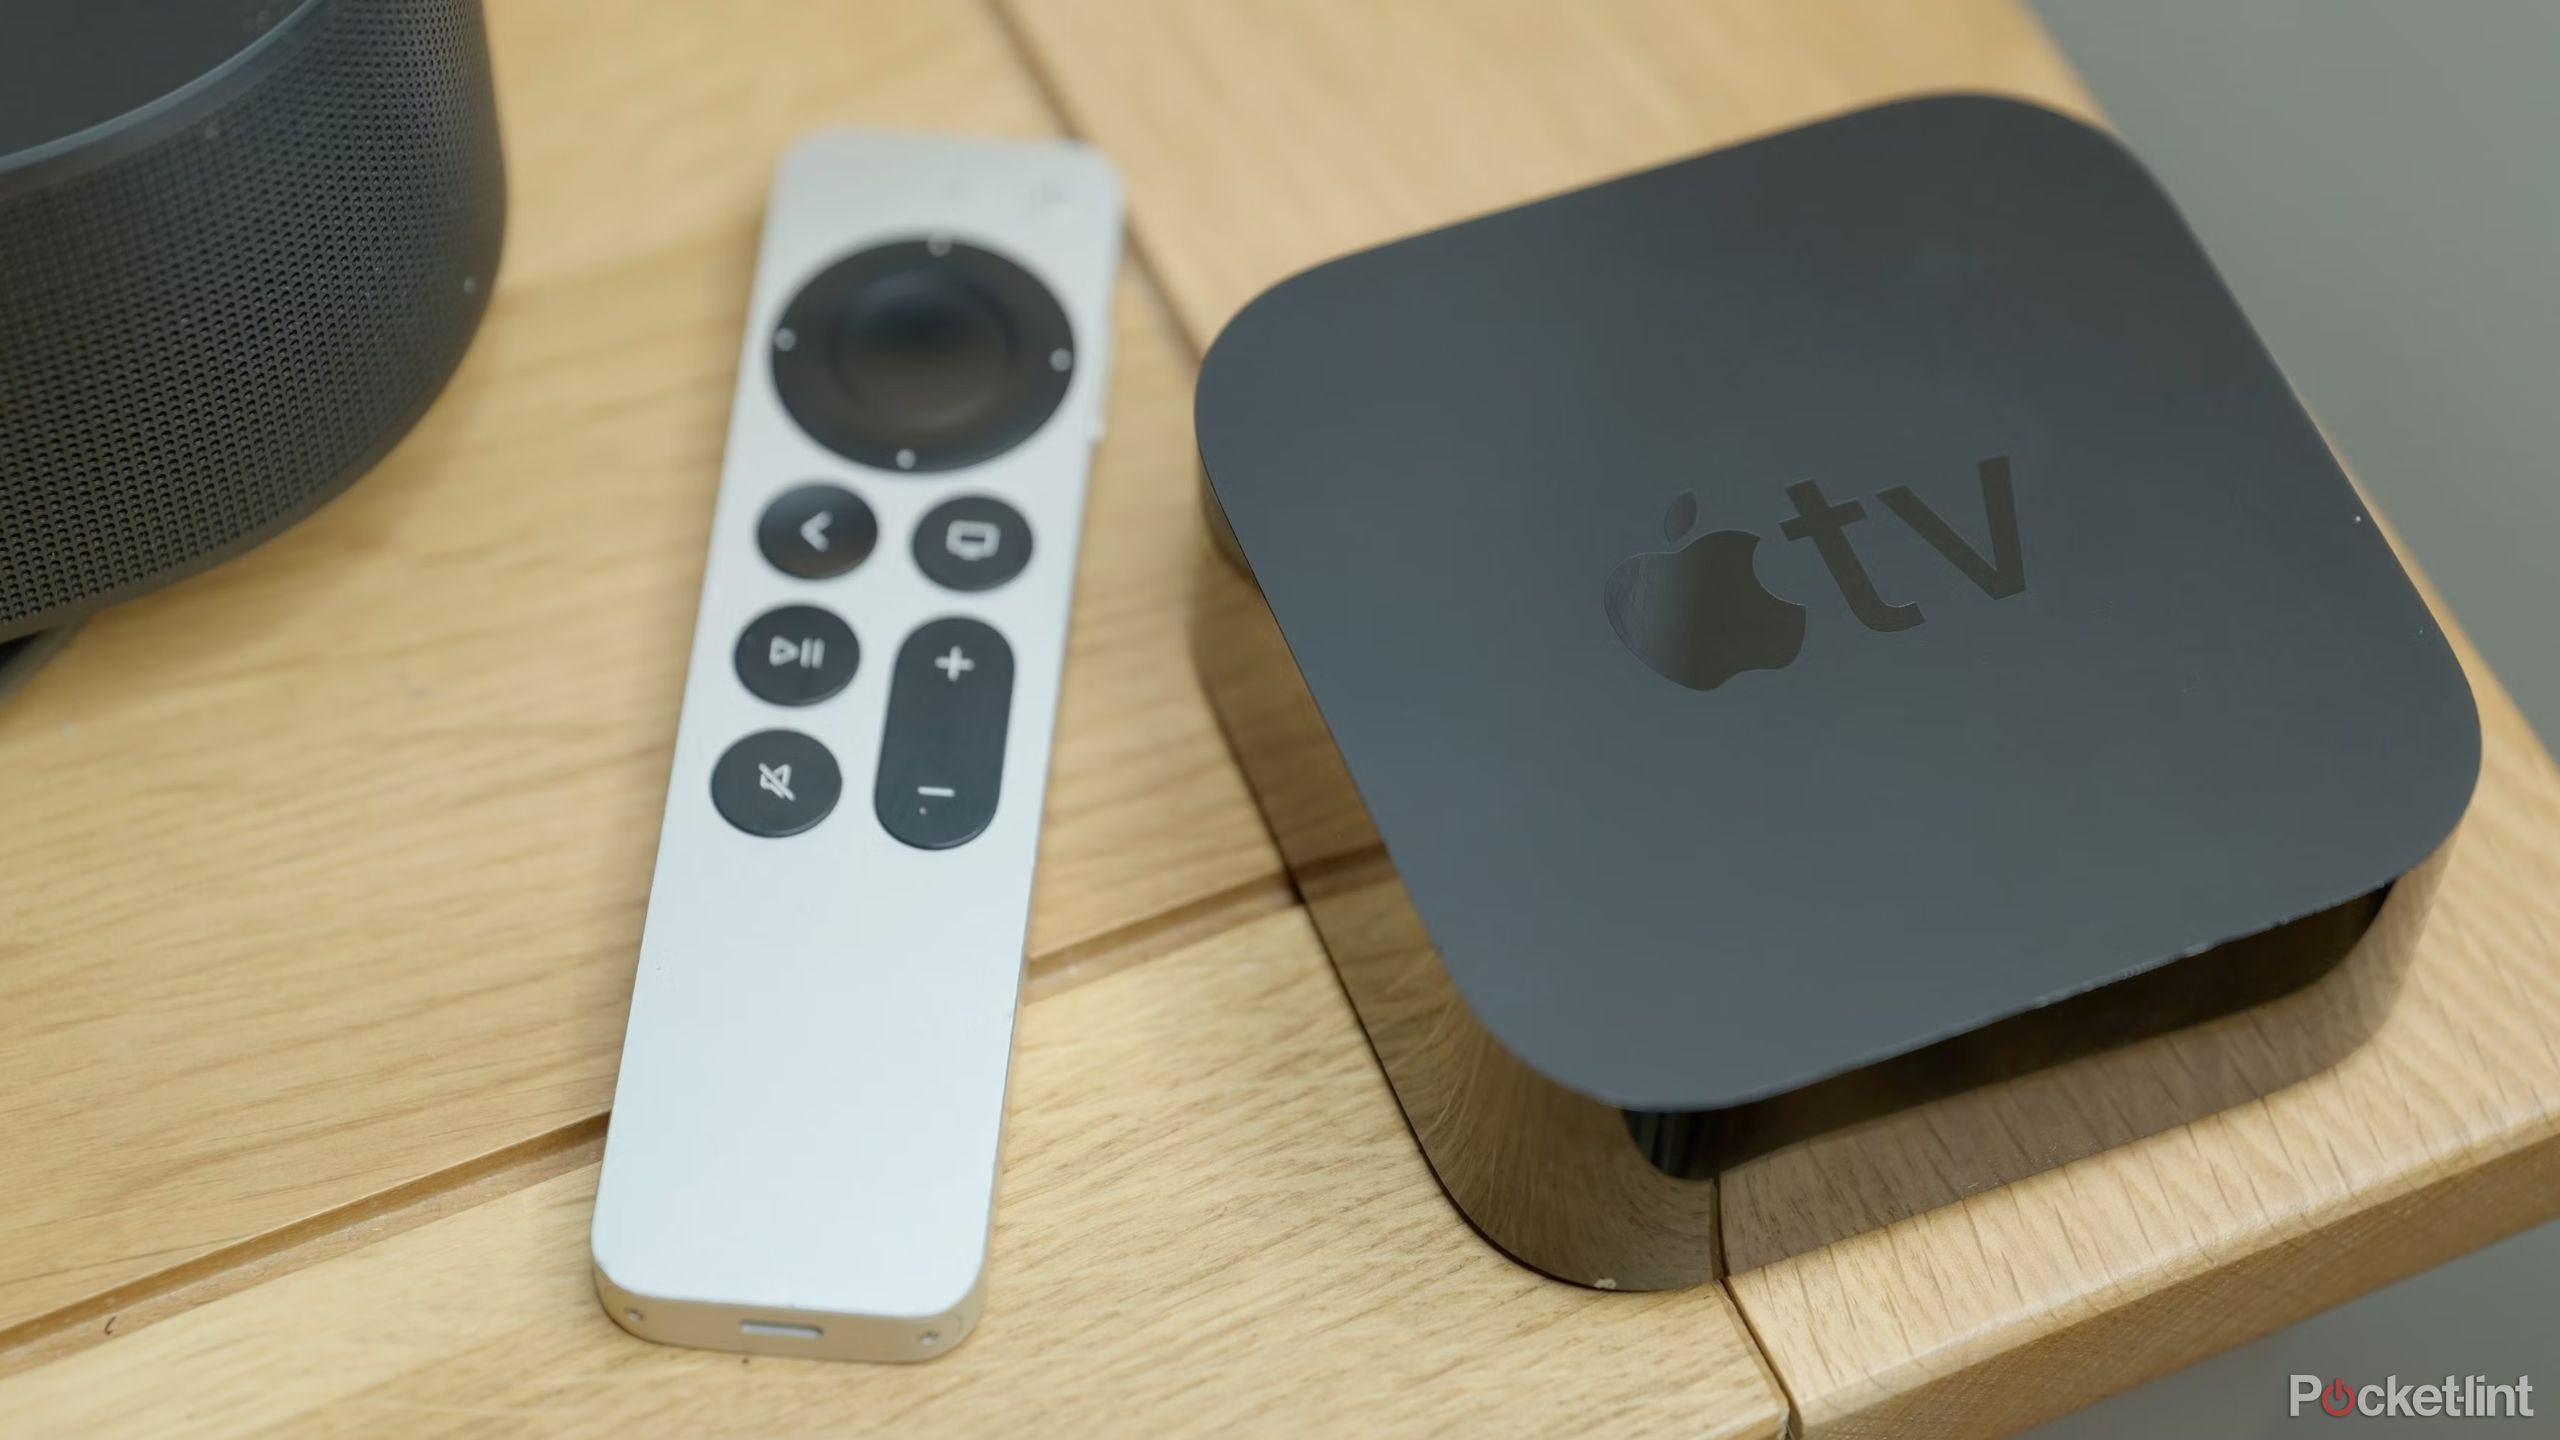 How to pair a remote to your Apple TV